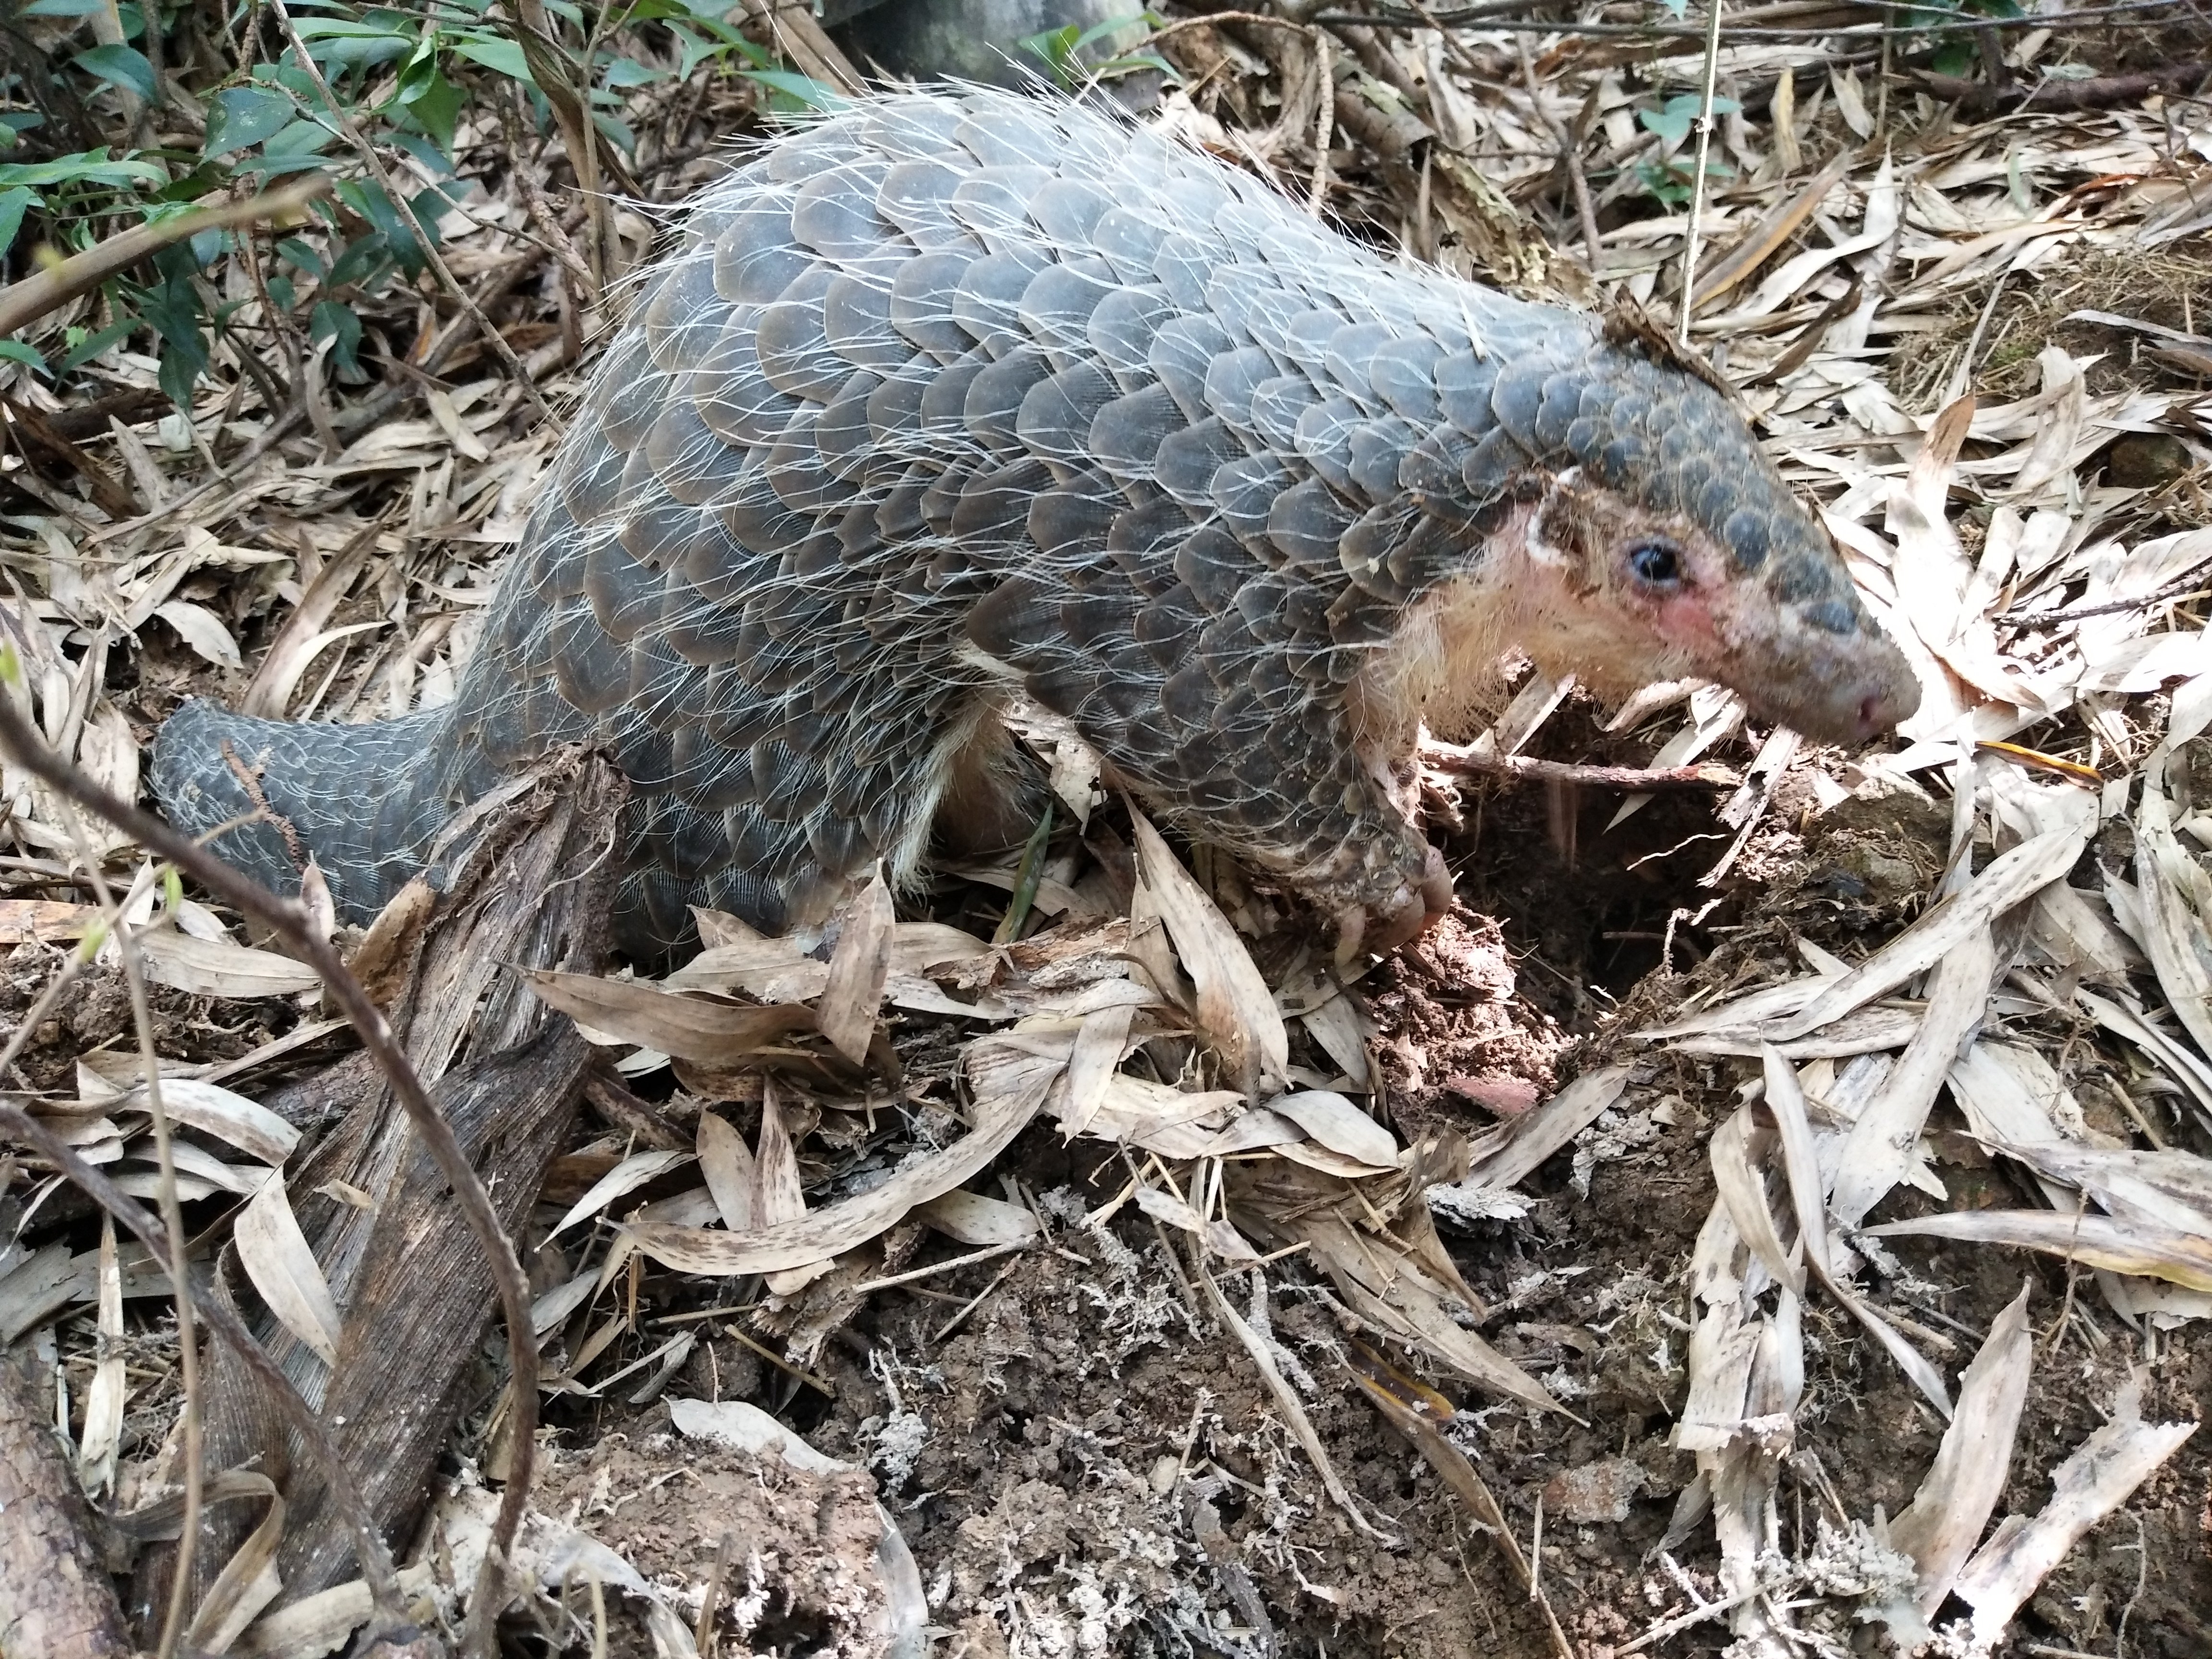 Scale of survival: A look at Chinese efforts to tackle the illegal pangolin trade 